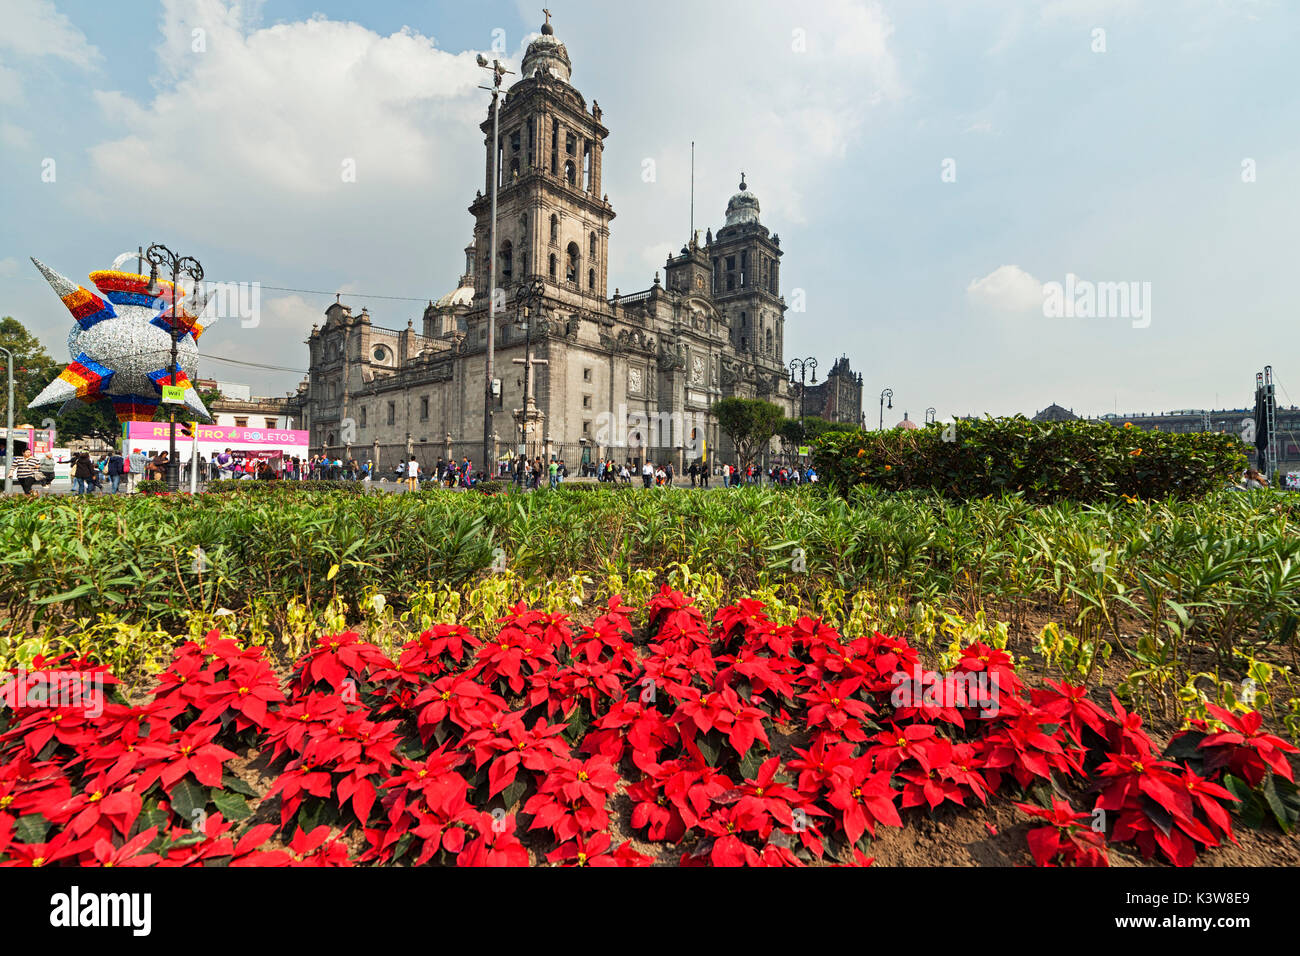 Metropolitan Cathedral, Costitution Place, Mexico City, Mexico. Stock Photo